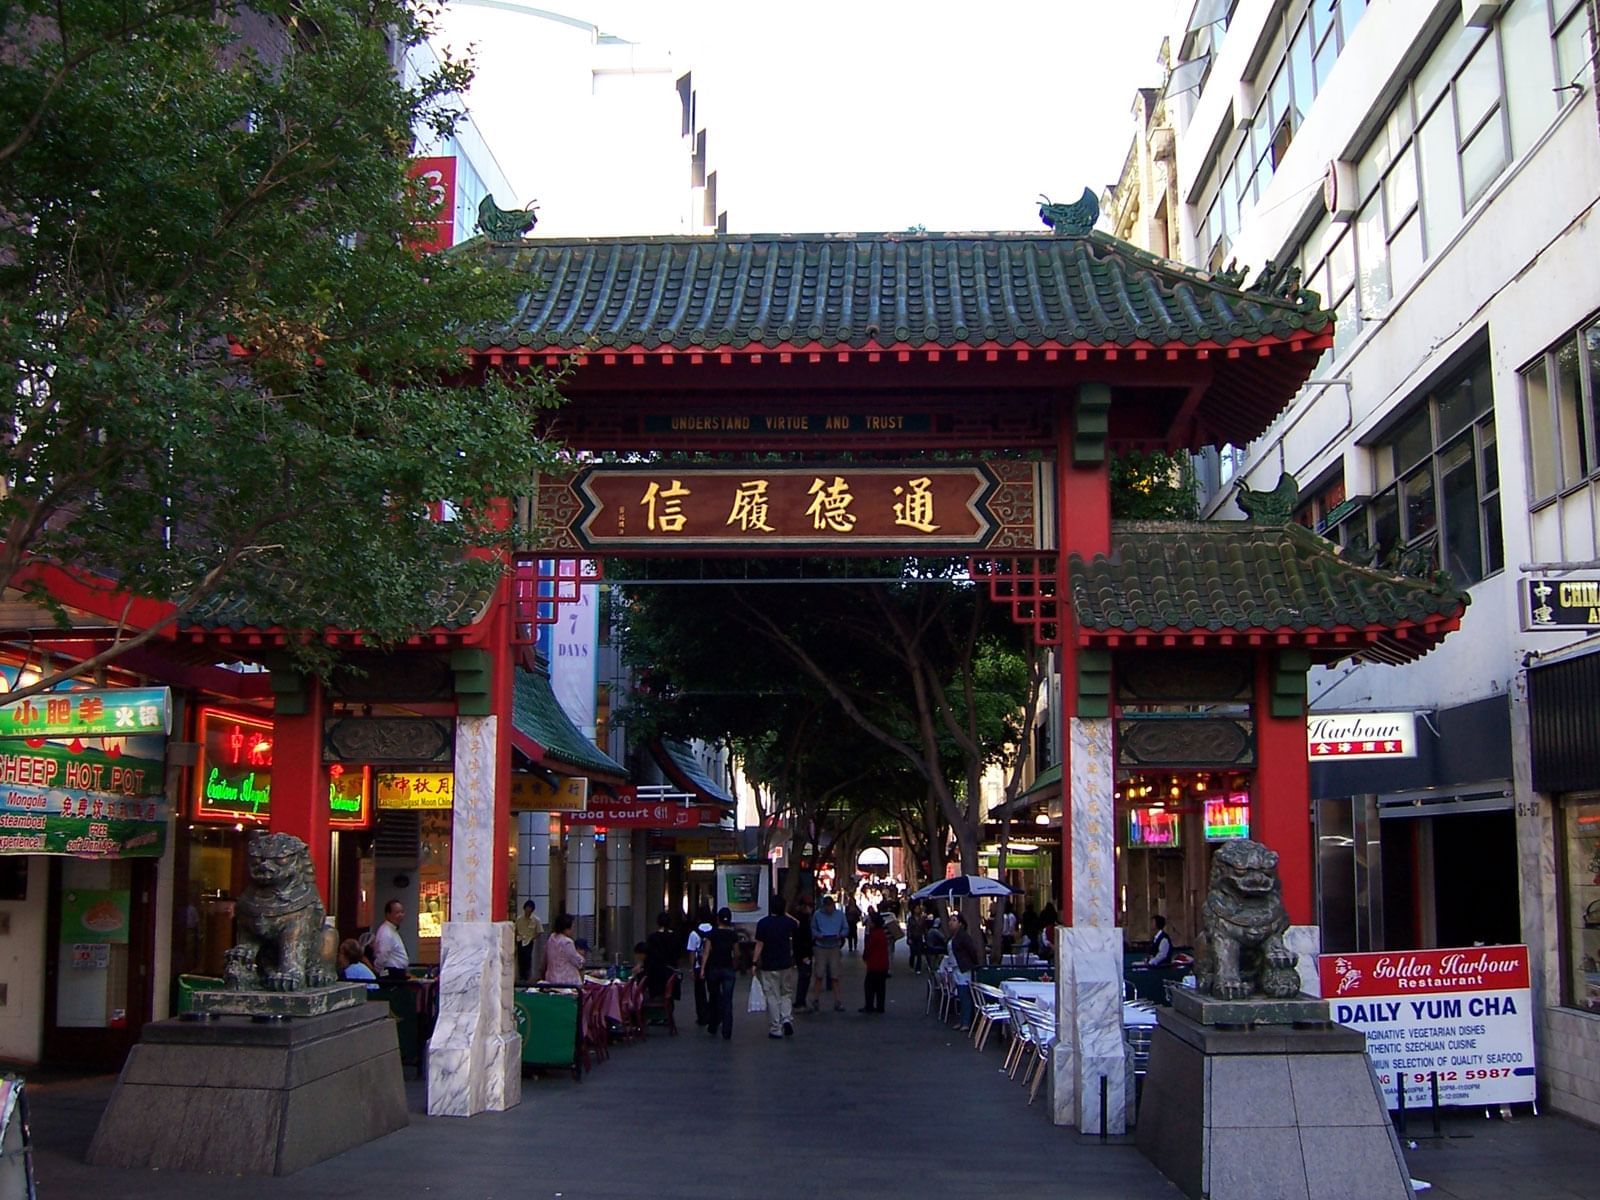 Exterior view of a Restaurant in Chinatown near Nesuto Hotels